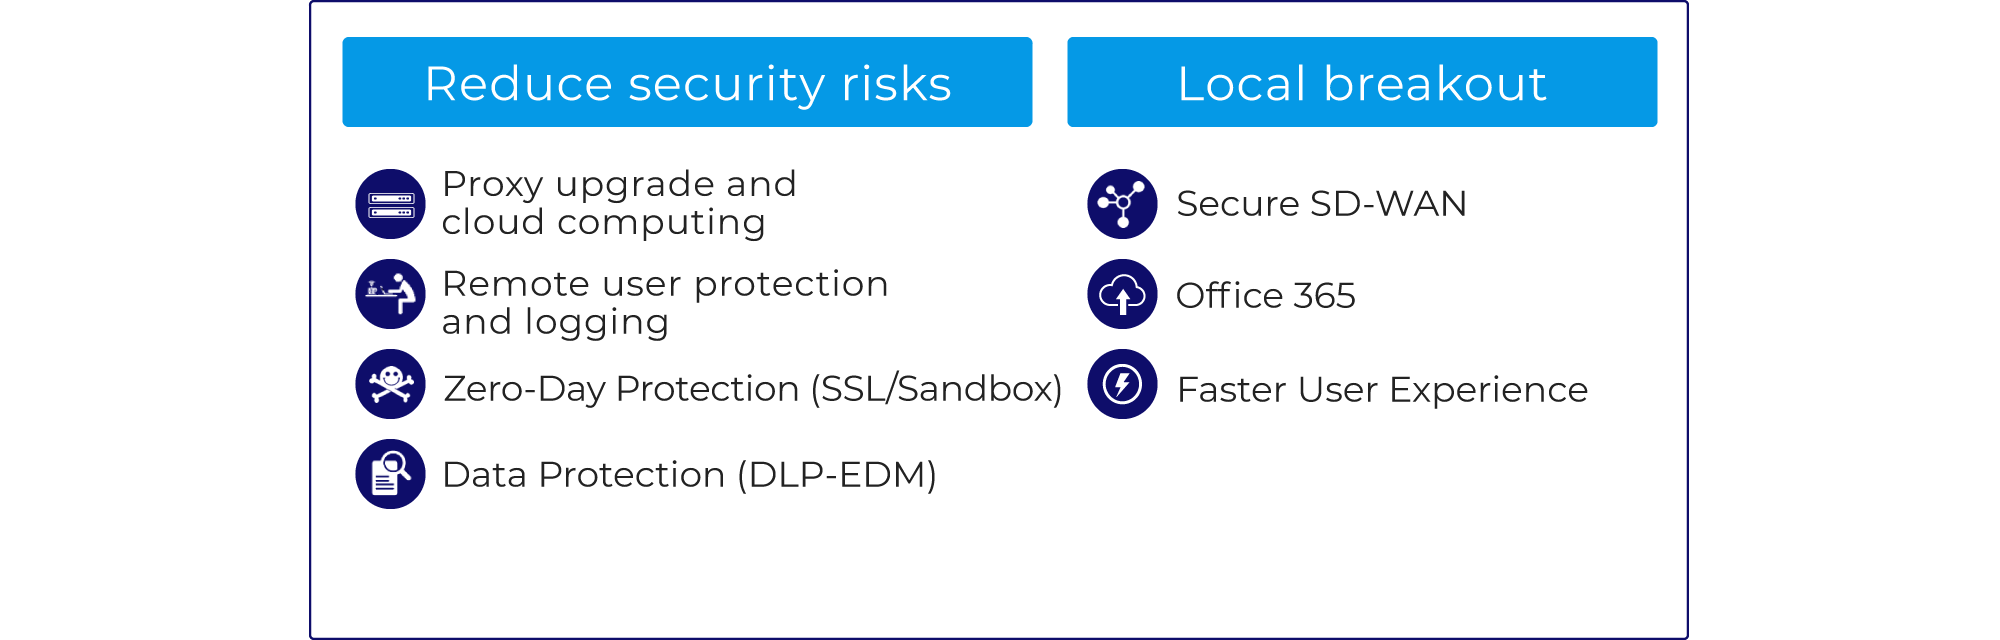 Reduced security risk, local breakout